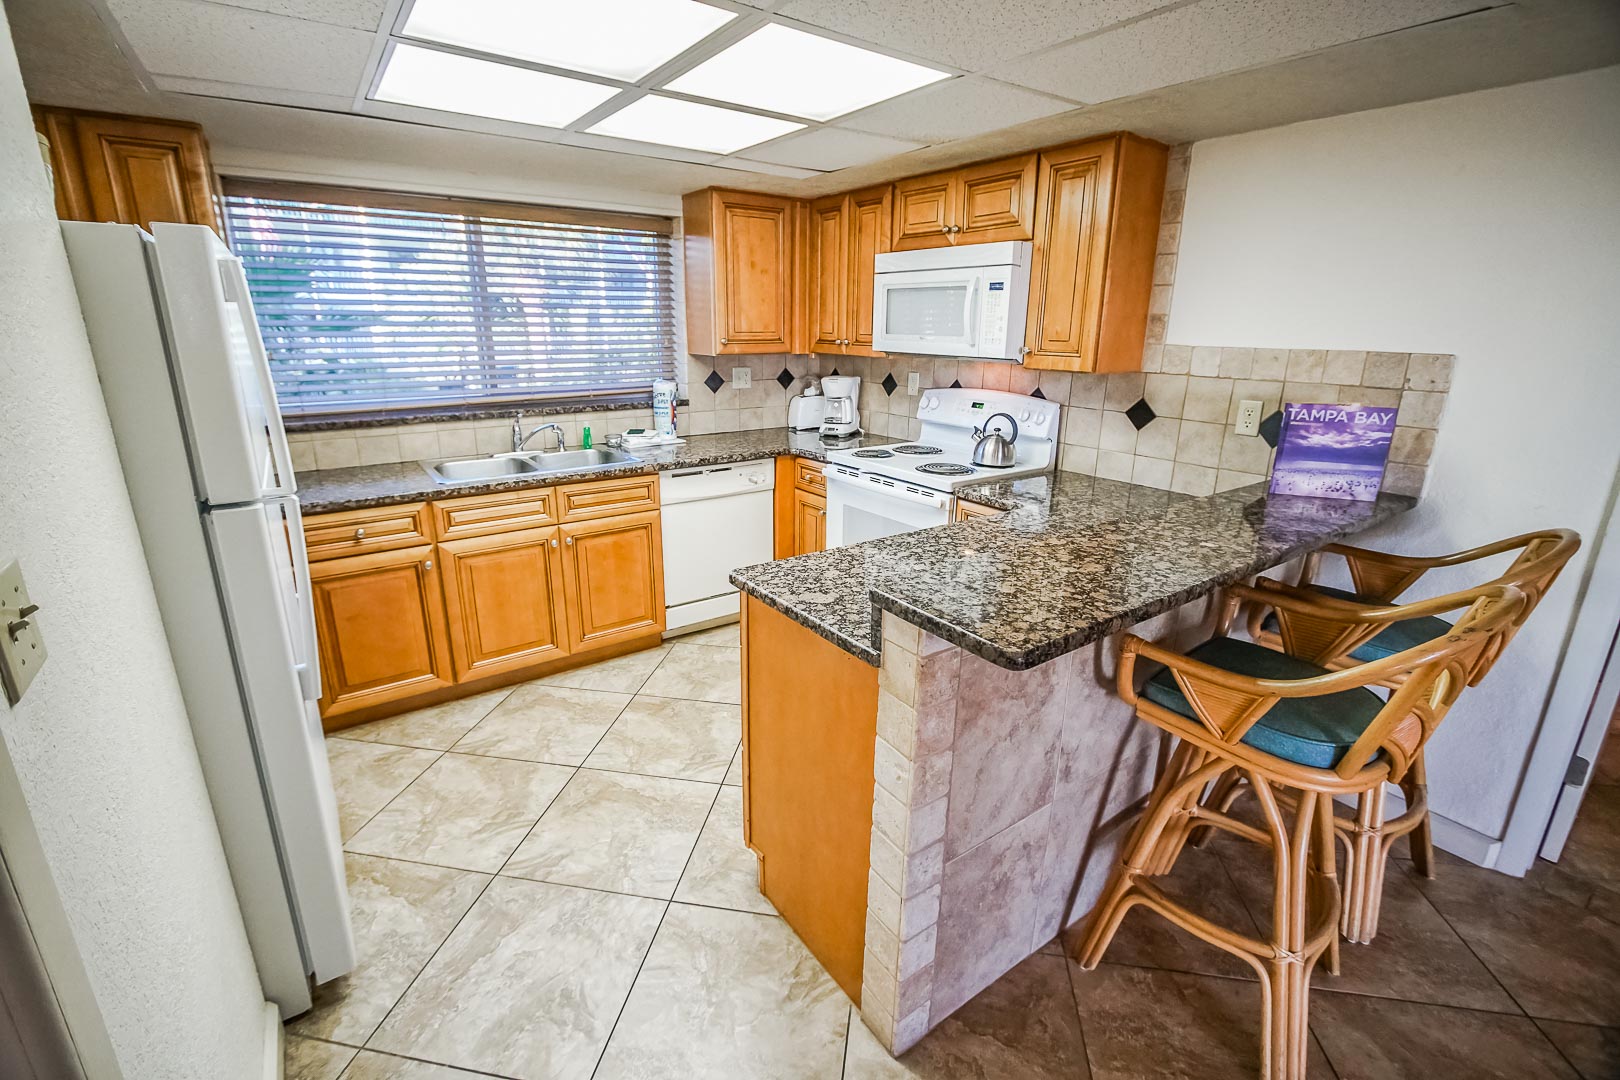 A fully equipped kitchen at VRI's Coral Reef Beach Resort in St. Pete Beach, Florida.